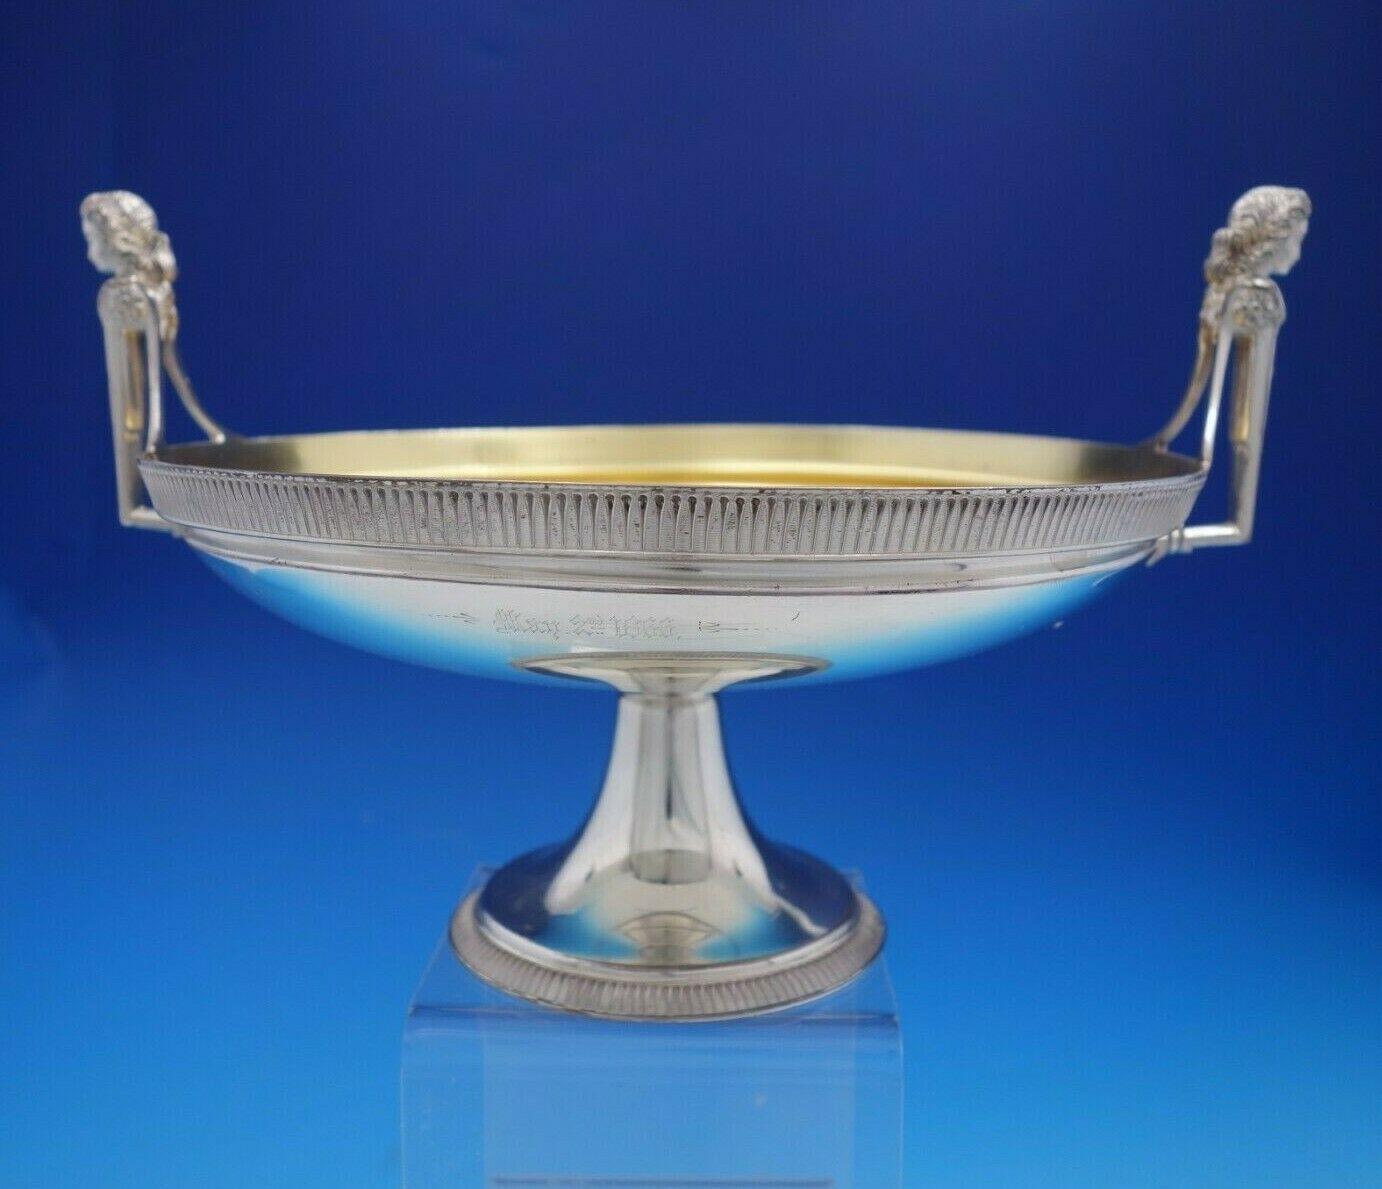 Bust by Gorham

Exceptional Bust by Gorham sterling silver shallow centerpiece bowl with gold washed interior, bust handles, and Acanthus decor. It is marked #211. This piece measures 10 1/4